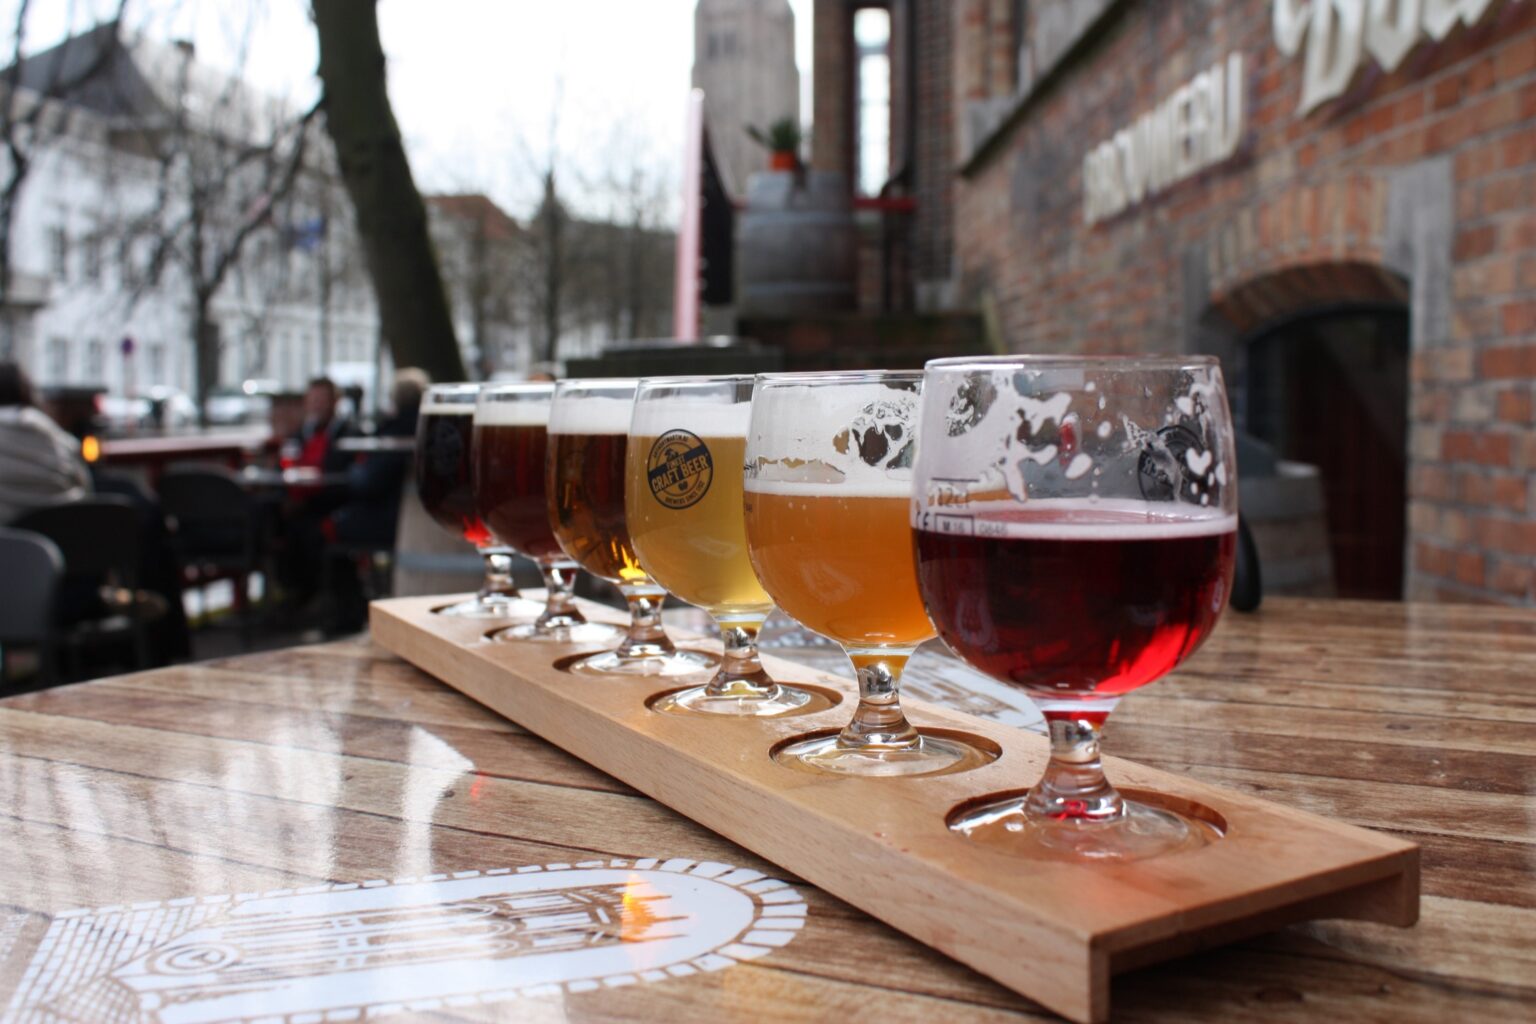 A flight of craft beers served outdoors